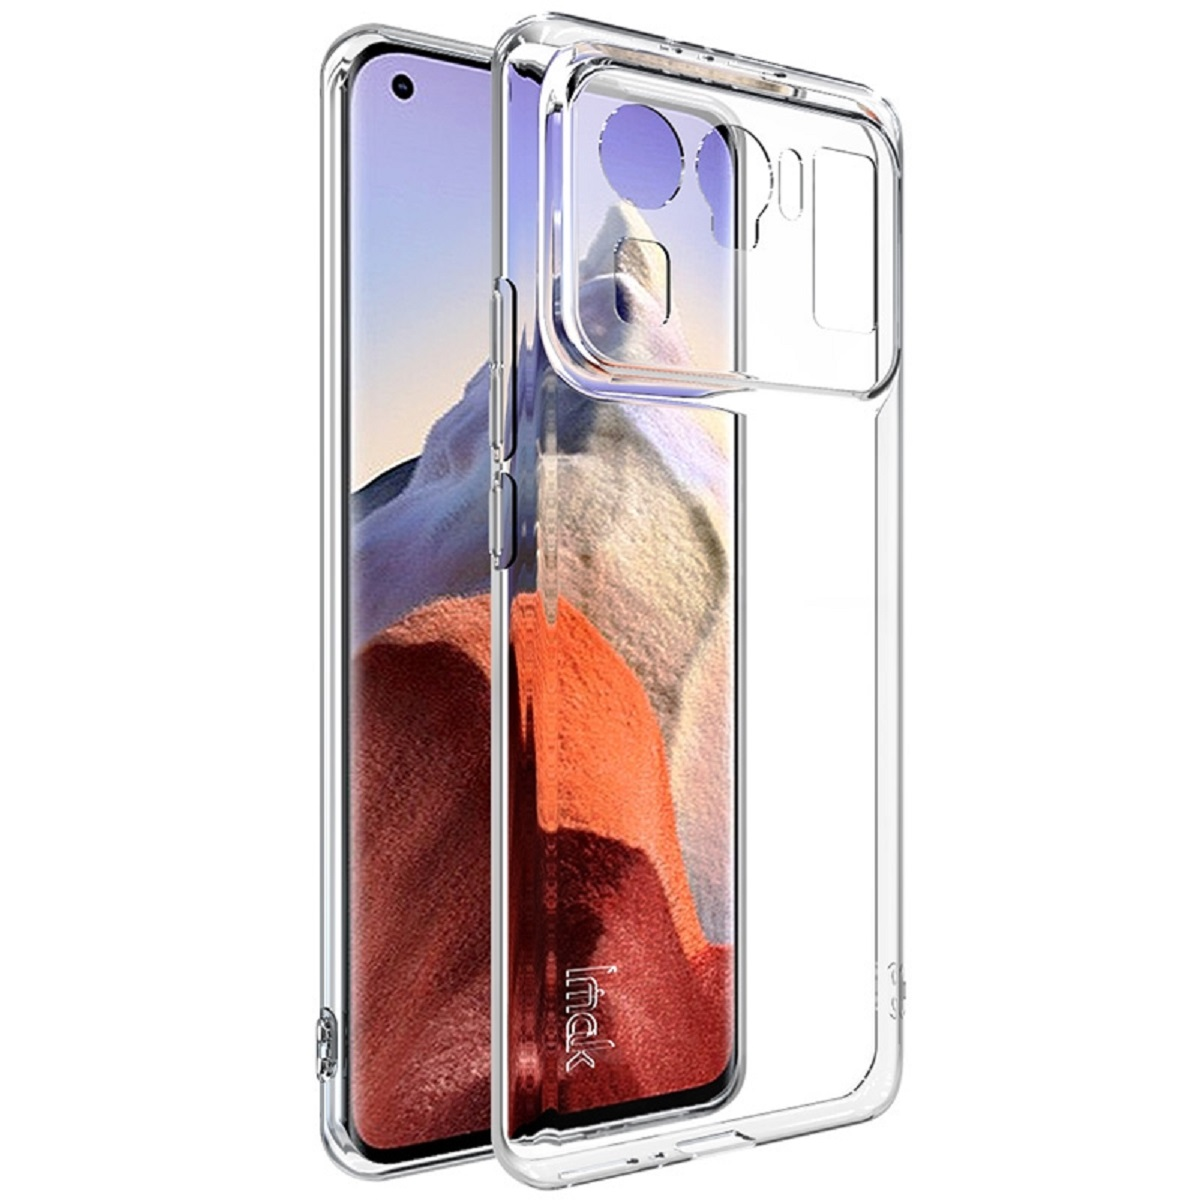 PROTECTORKING Backcover, Hülle, Xiaomi, Ultra, Backcover, 11 Mi Transparent